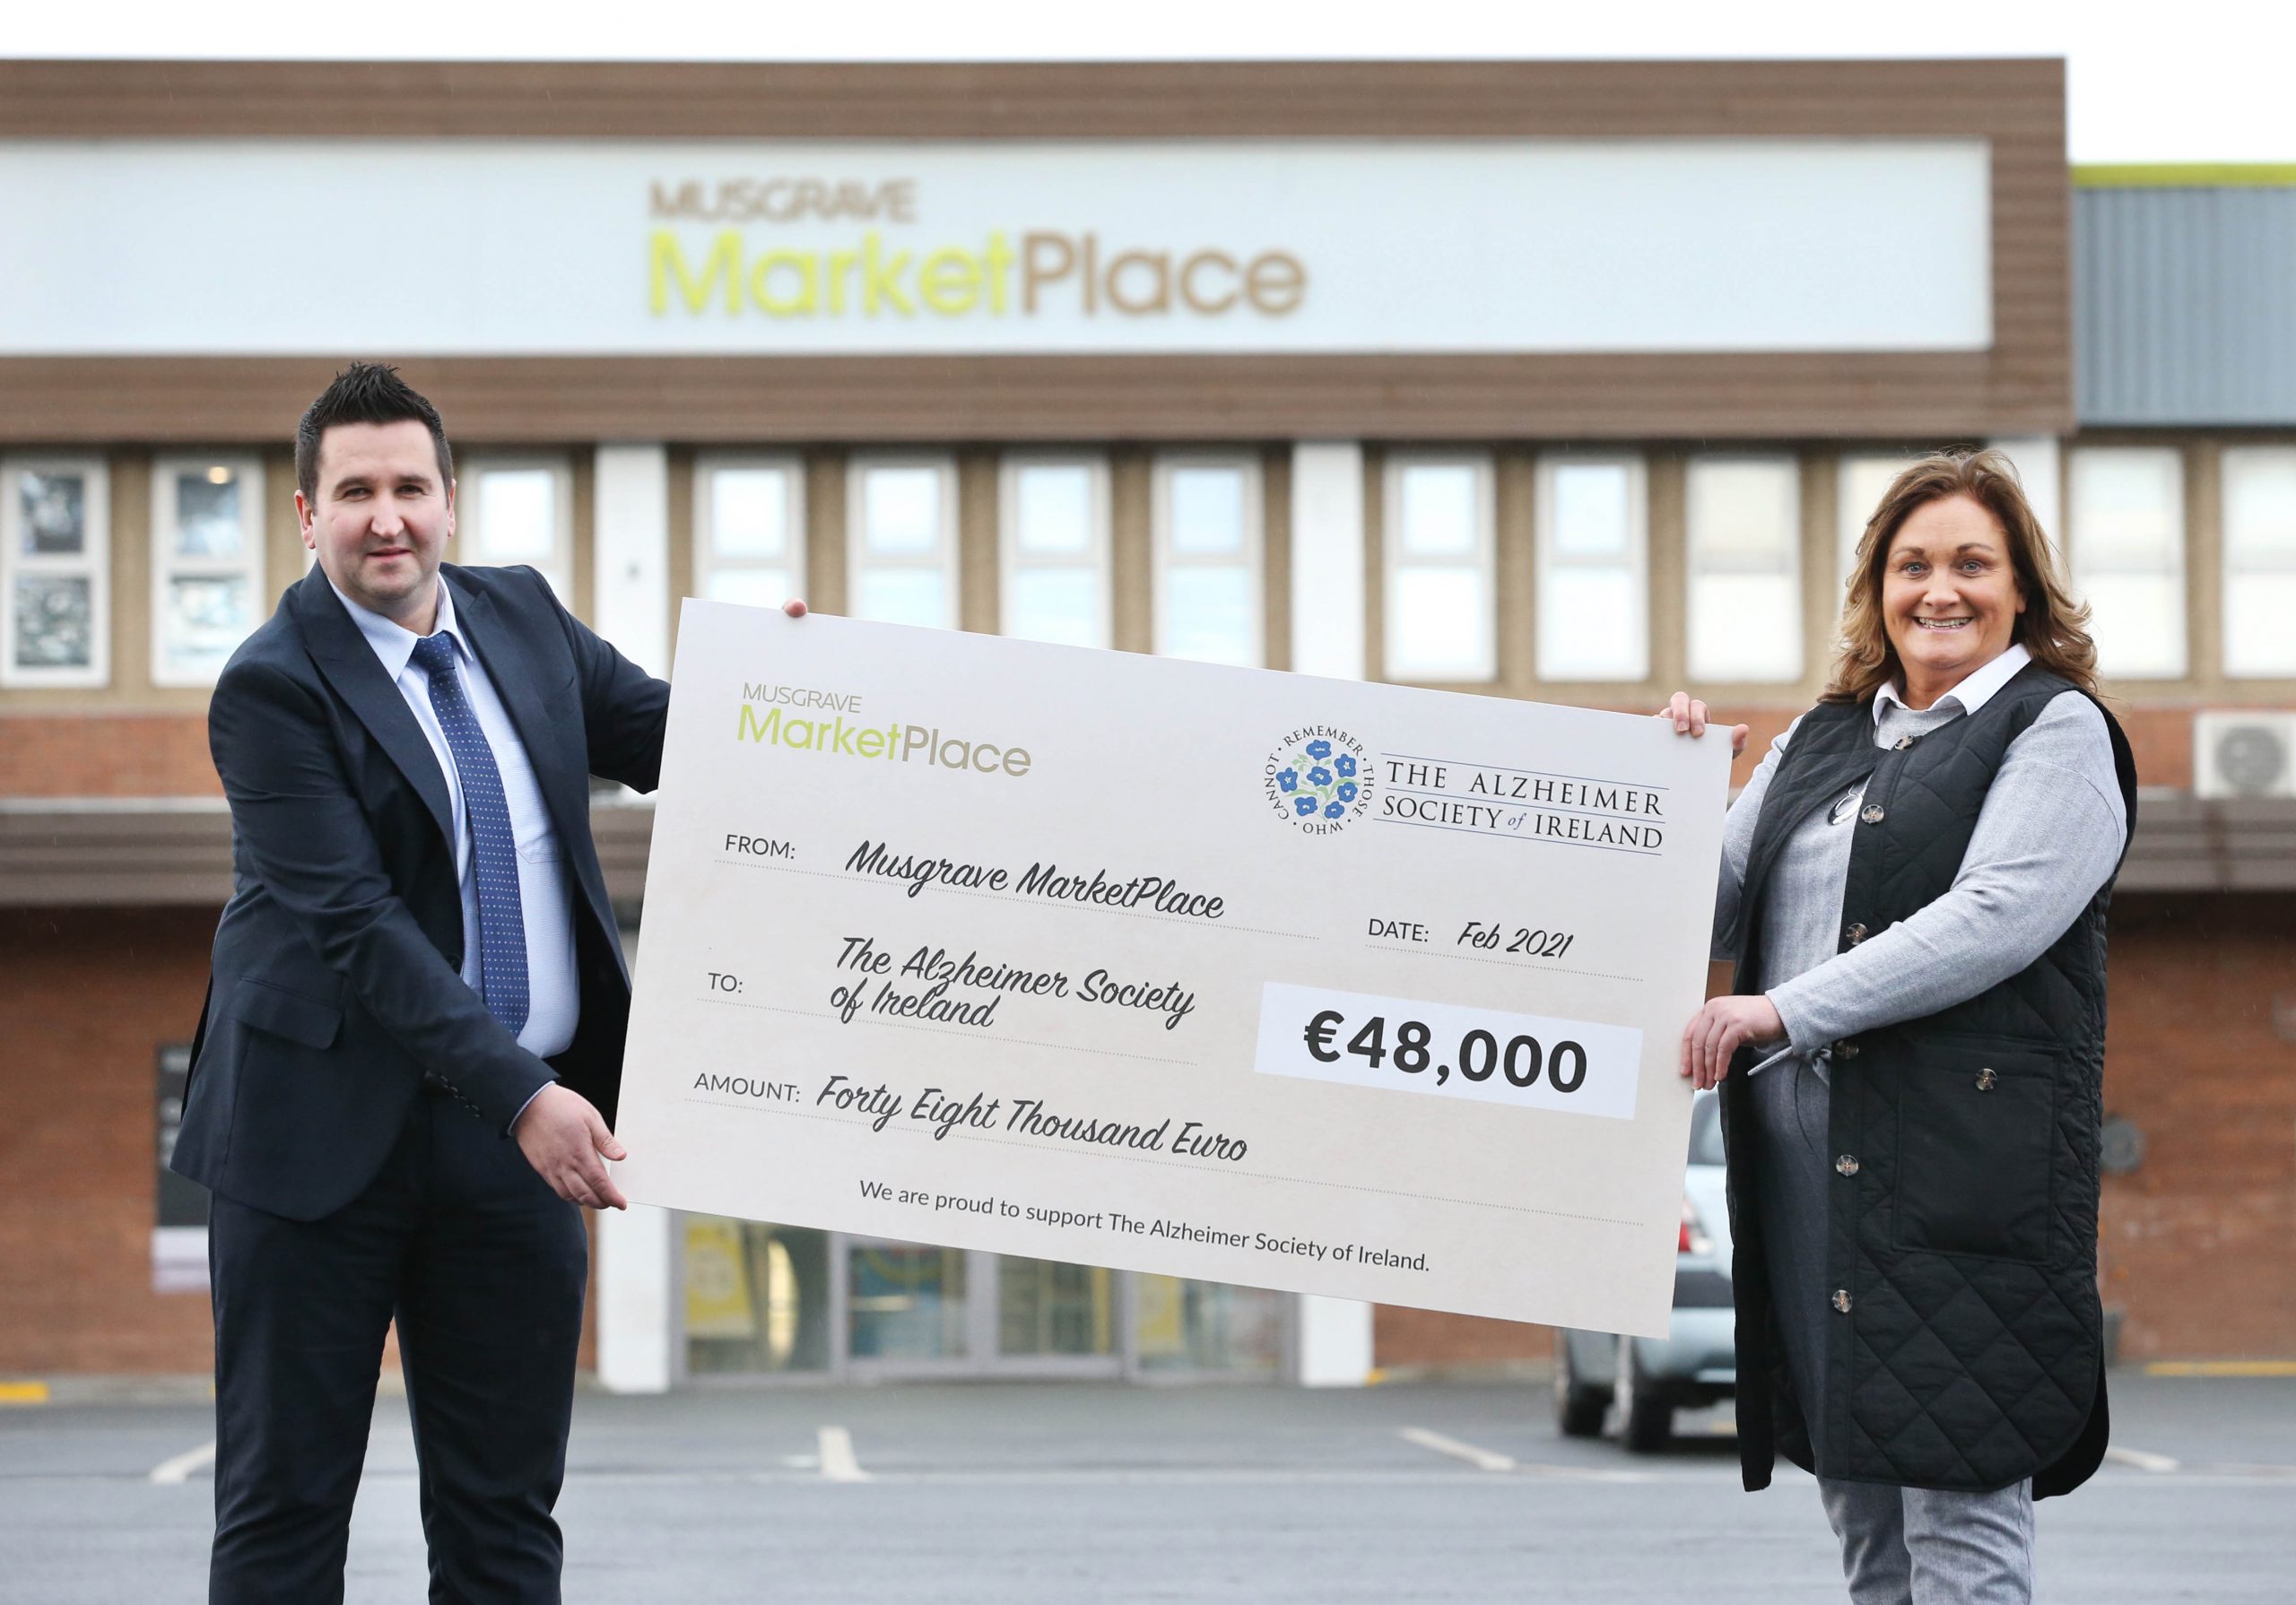 Musgrave MarketPlace raises €48,000 for The Alzheimer Society of Ireland in 2020